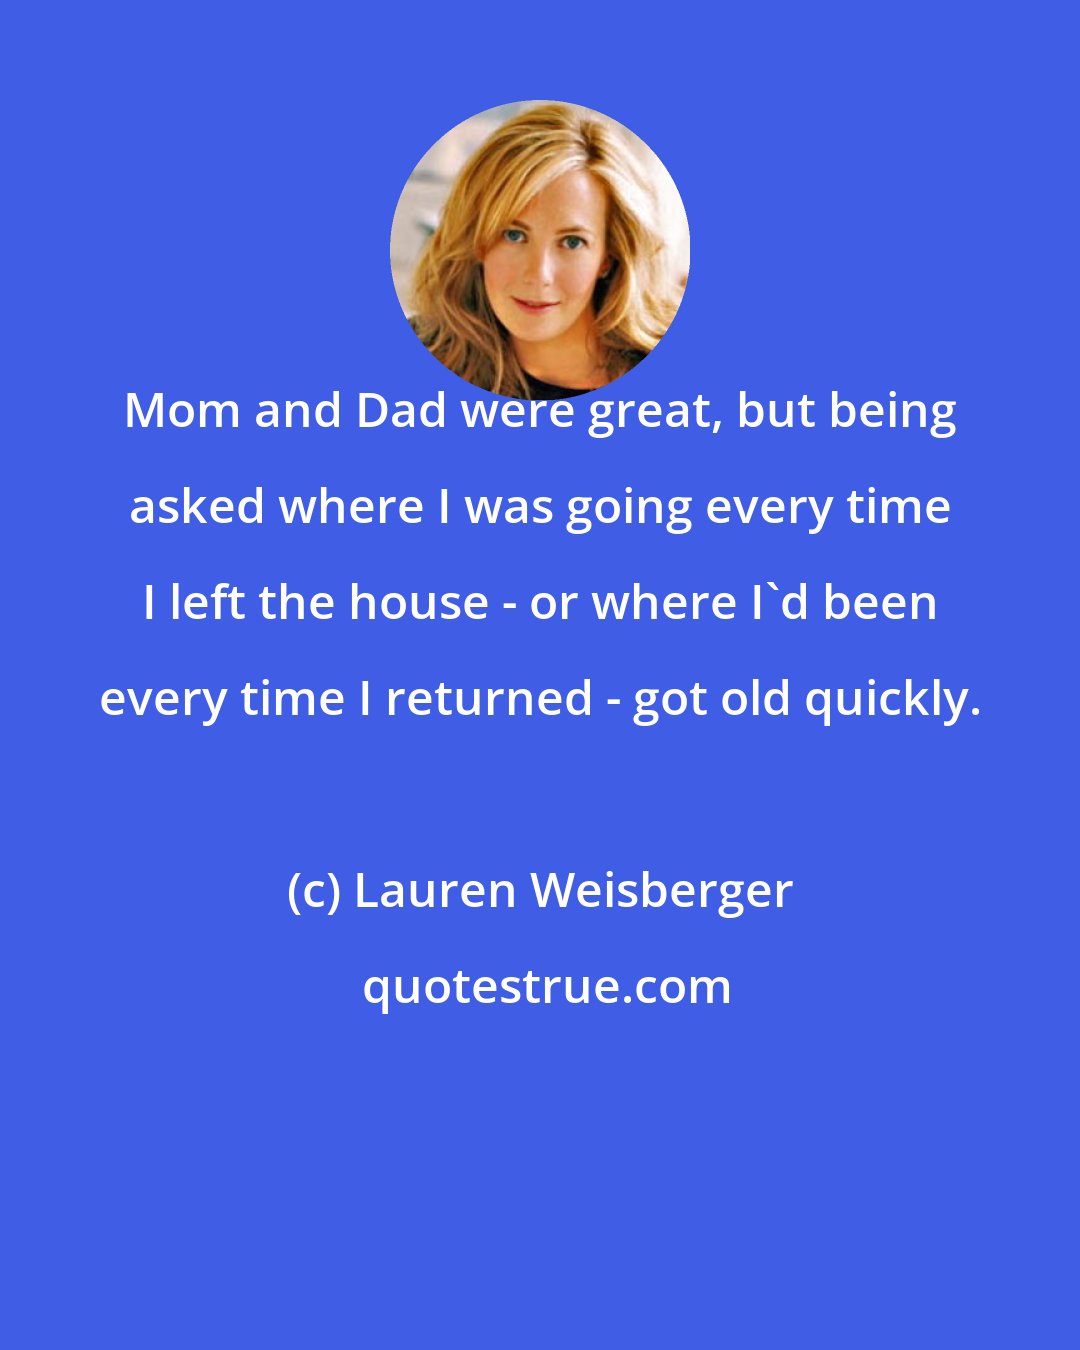 Lauren Weisberger: Mom and Dad were great, but being asked where I was going every time I left the house - or where I'd been every time I returned - got old quickly.